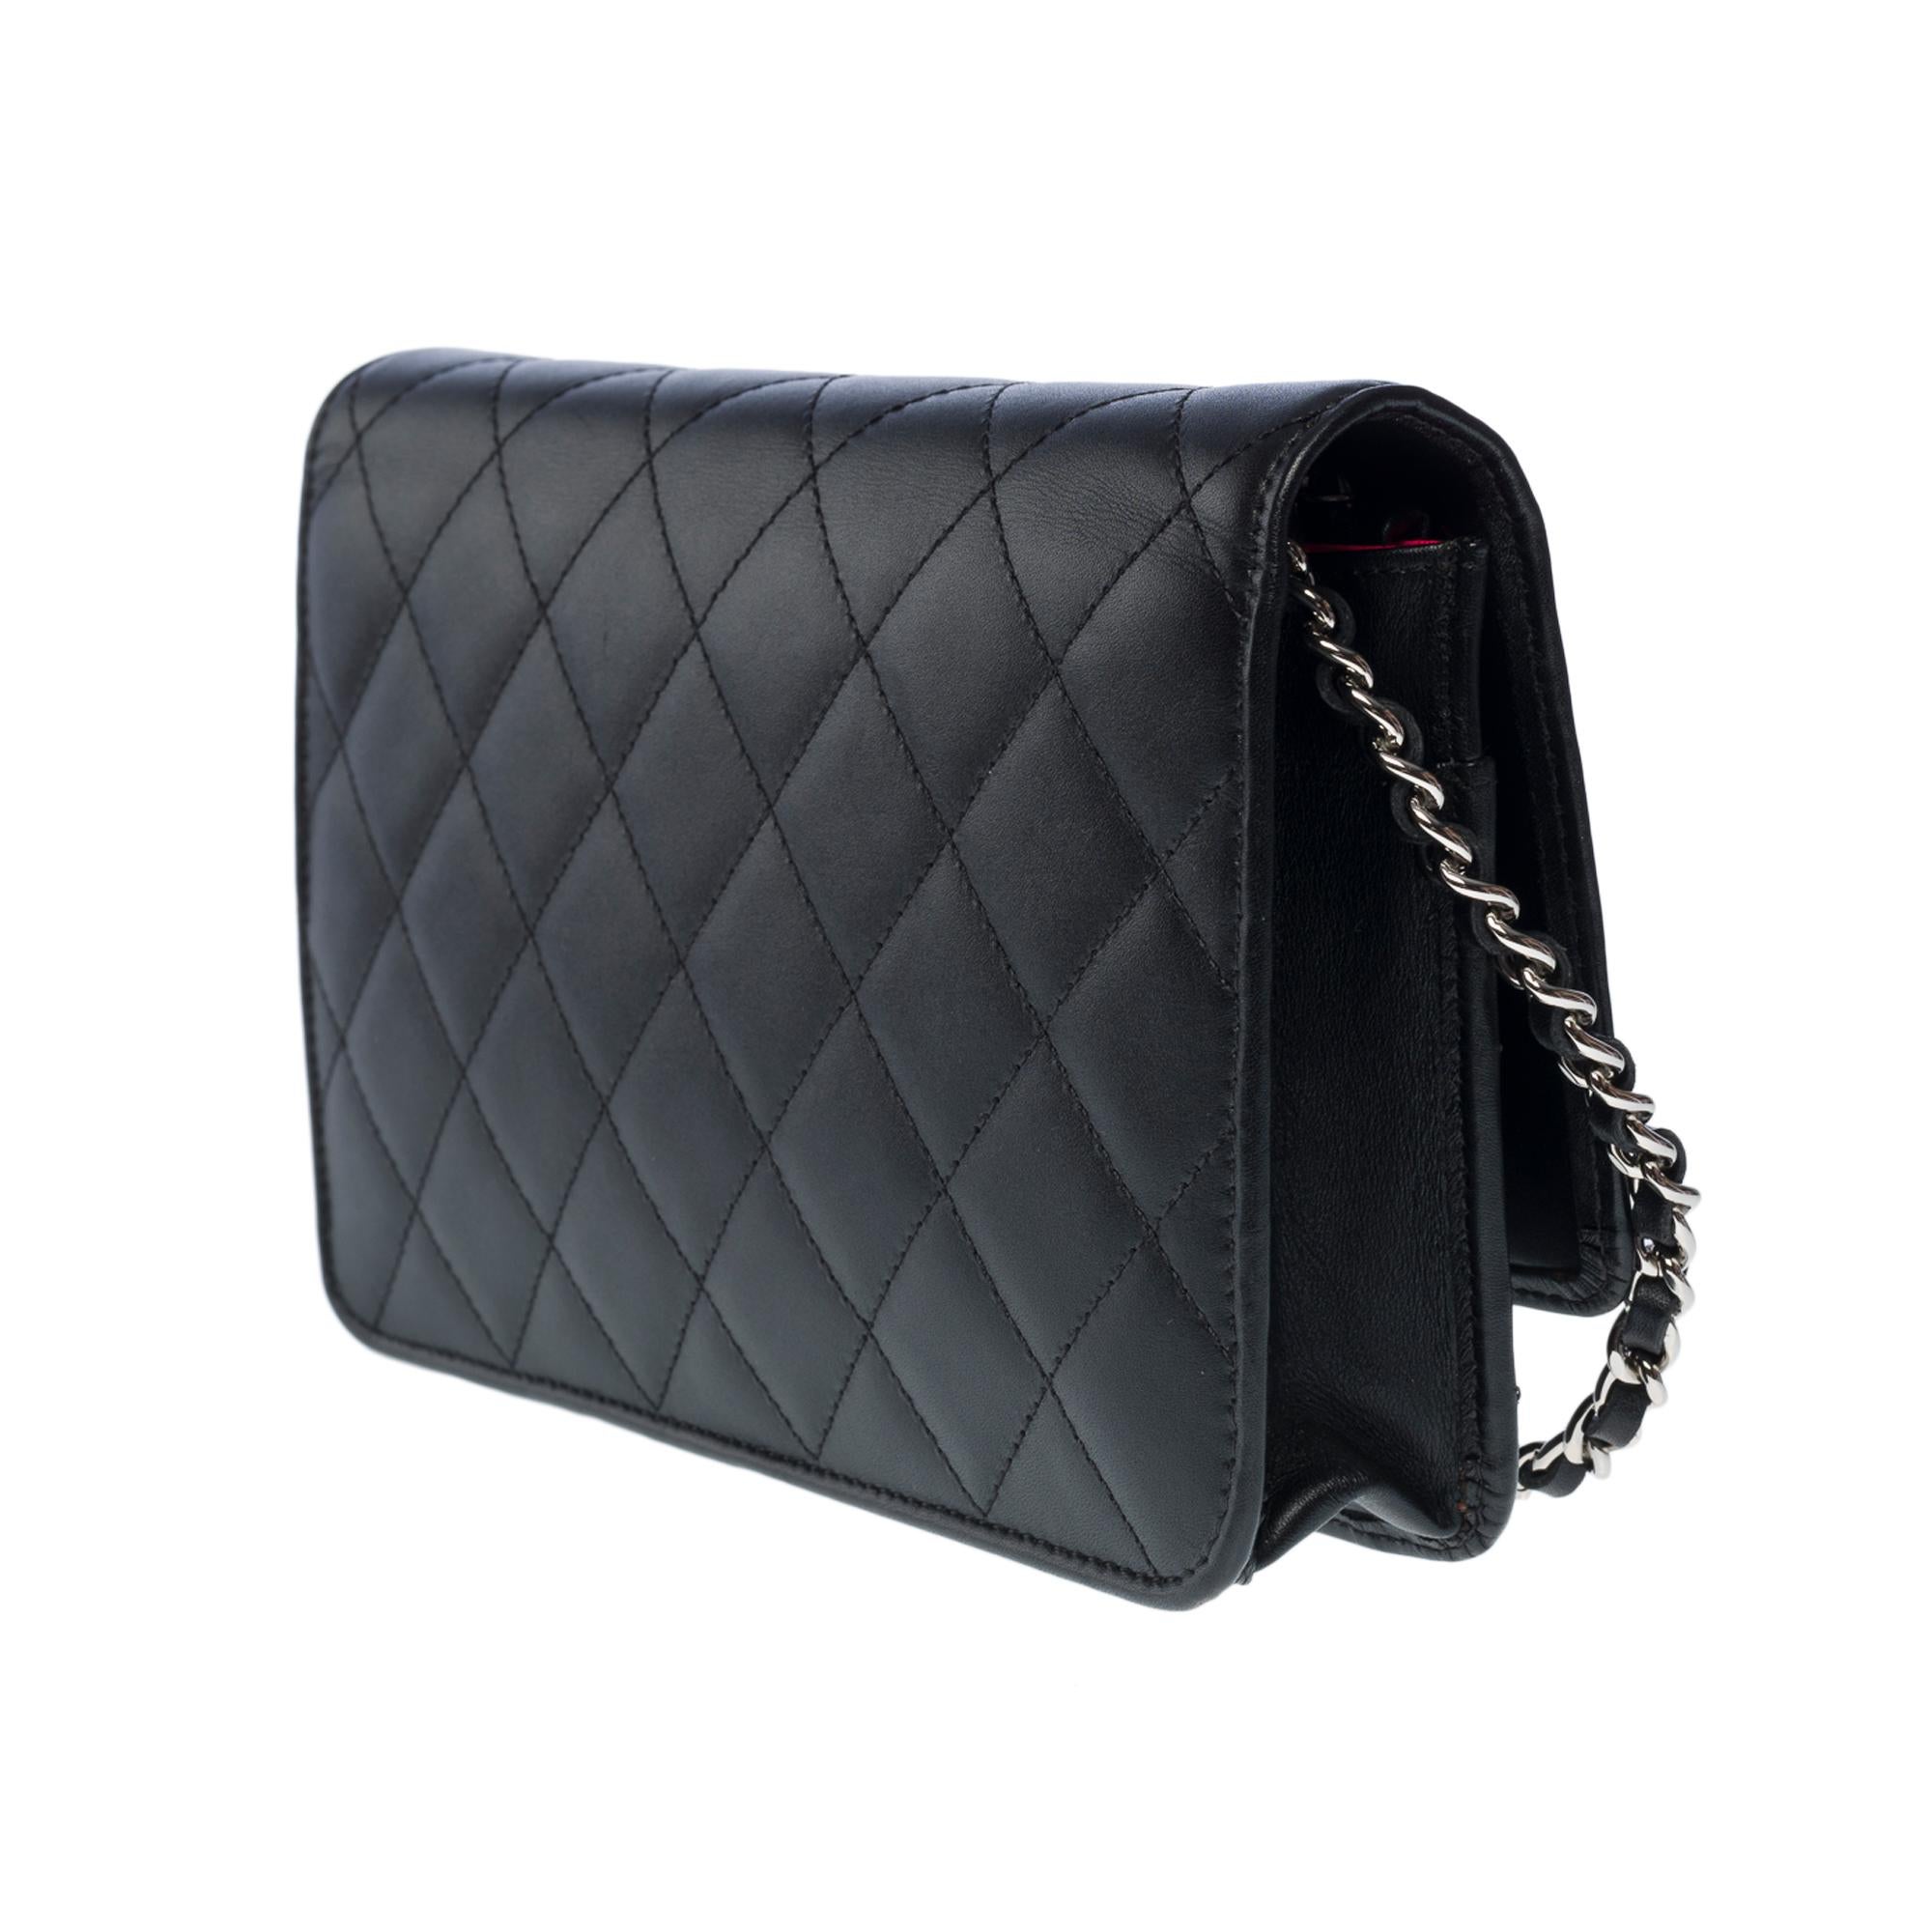 Cambon Chanel Wallet on Chain (WOC)  shoulder bag in black quilted leather, SHW 1